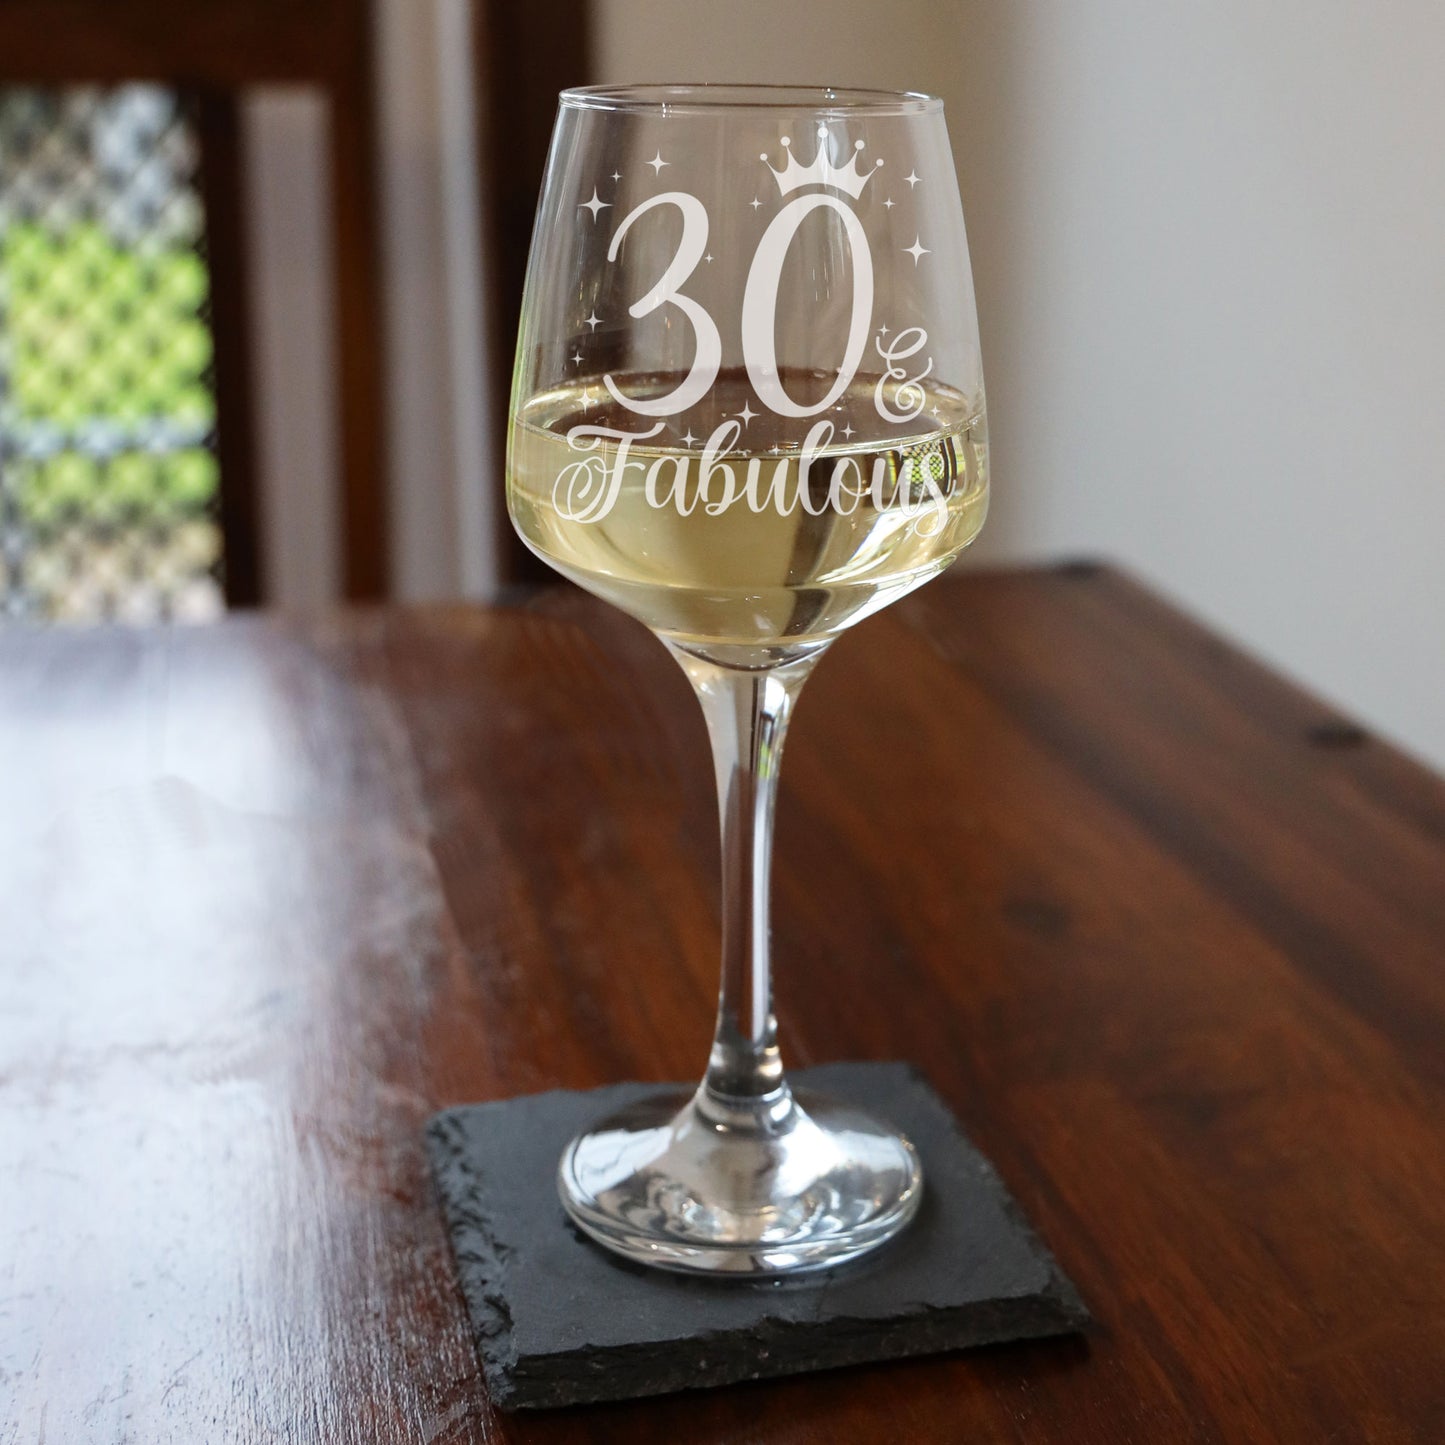 30 & Fabulous 30th Birthday Gift Engraved Wine Glass and/or Coaster Set  - Always Looking Good - Wine Glass Only  